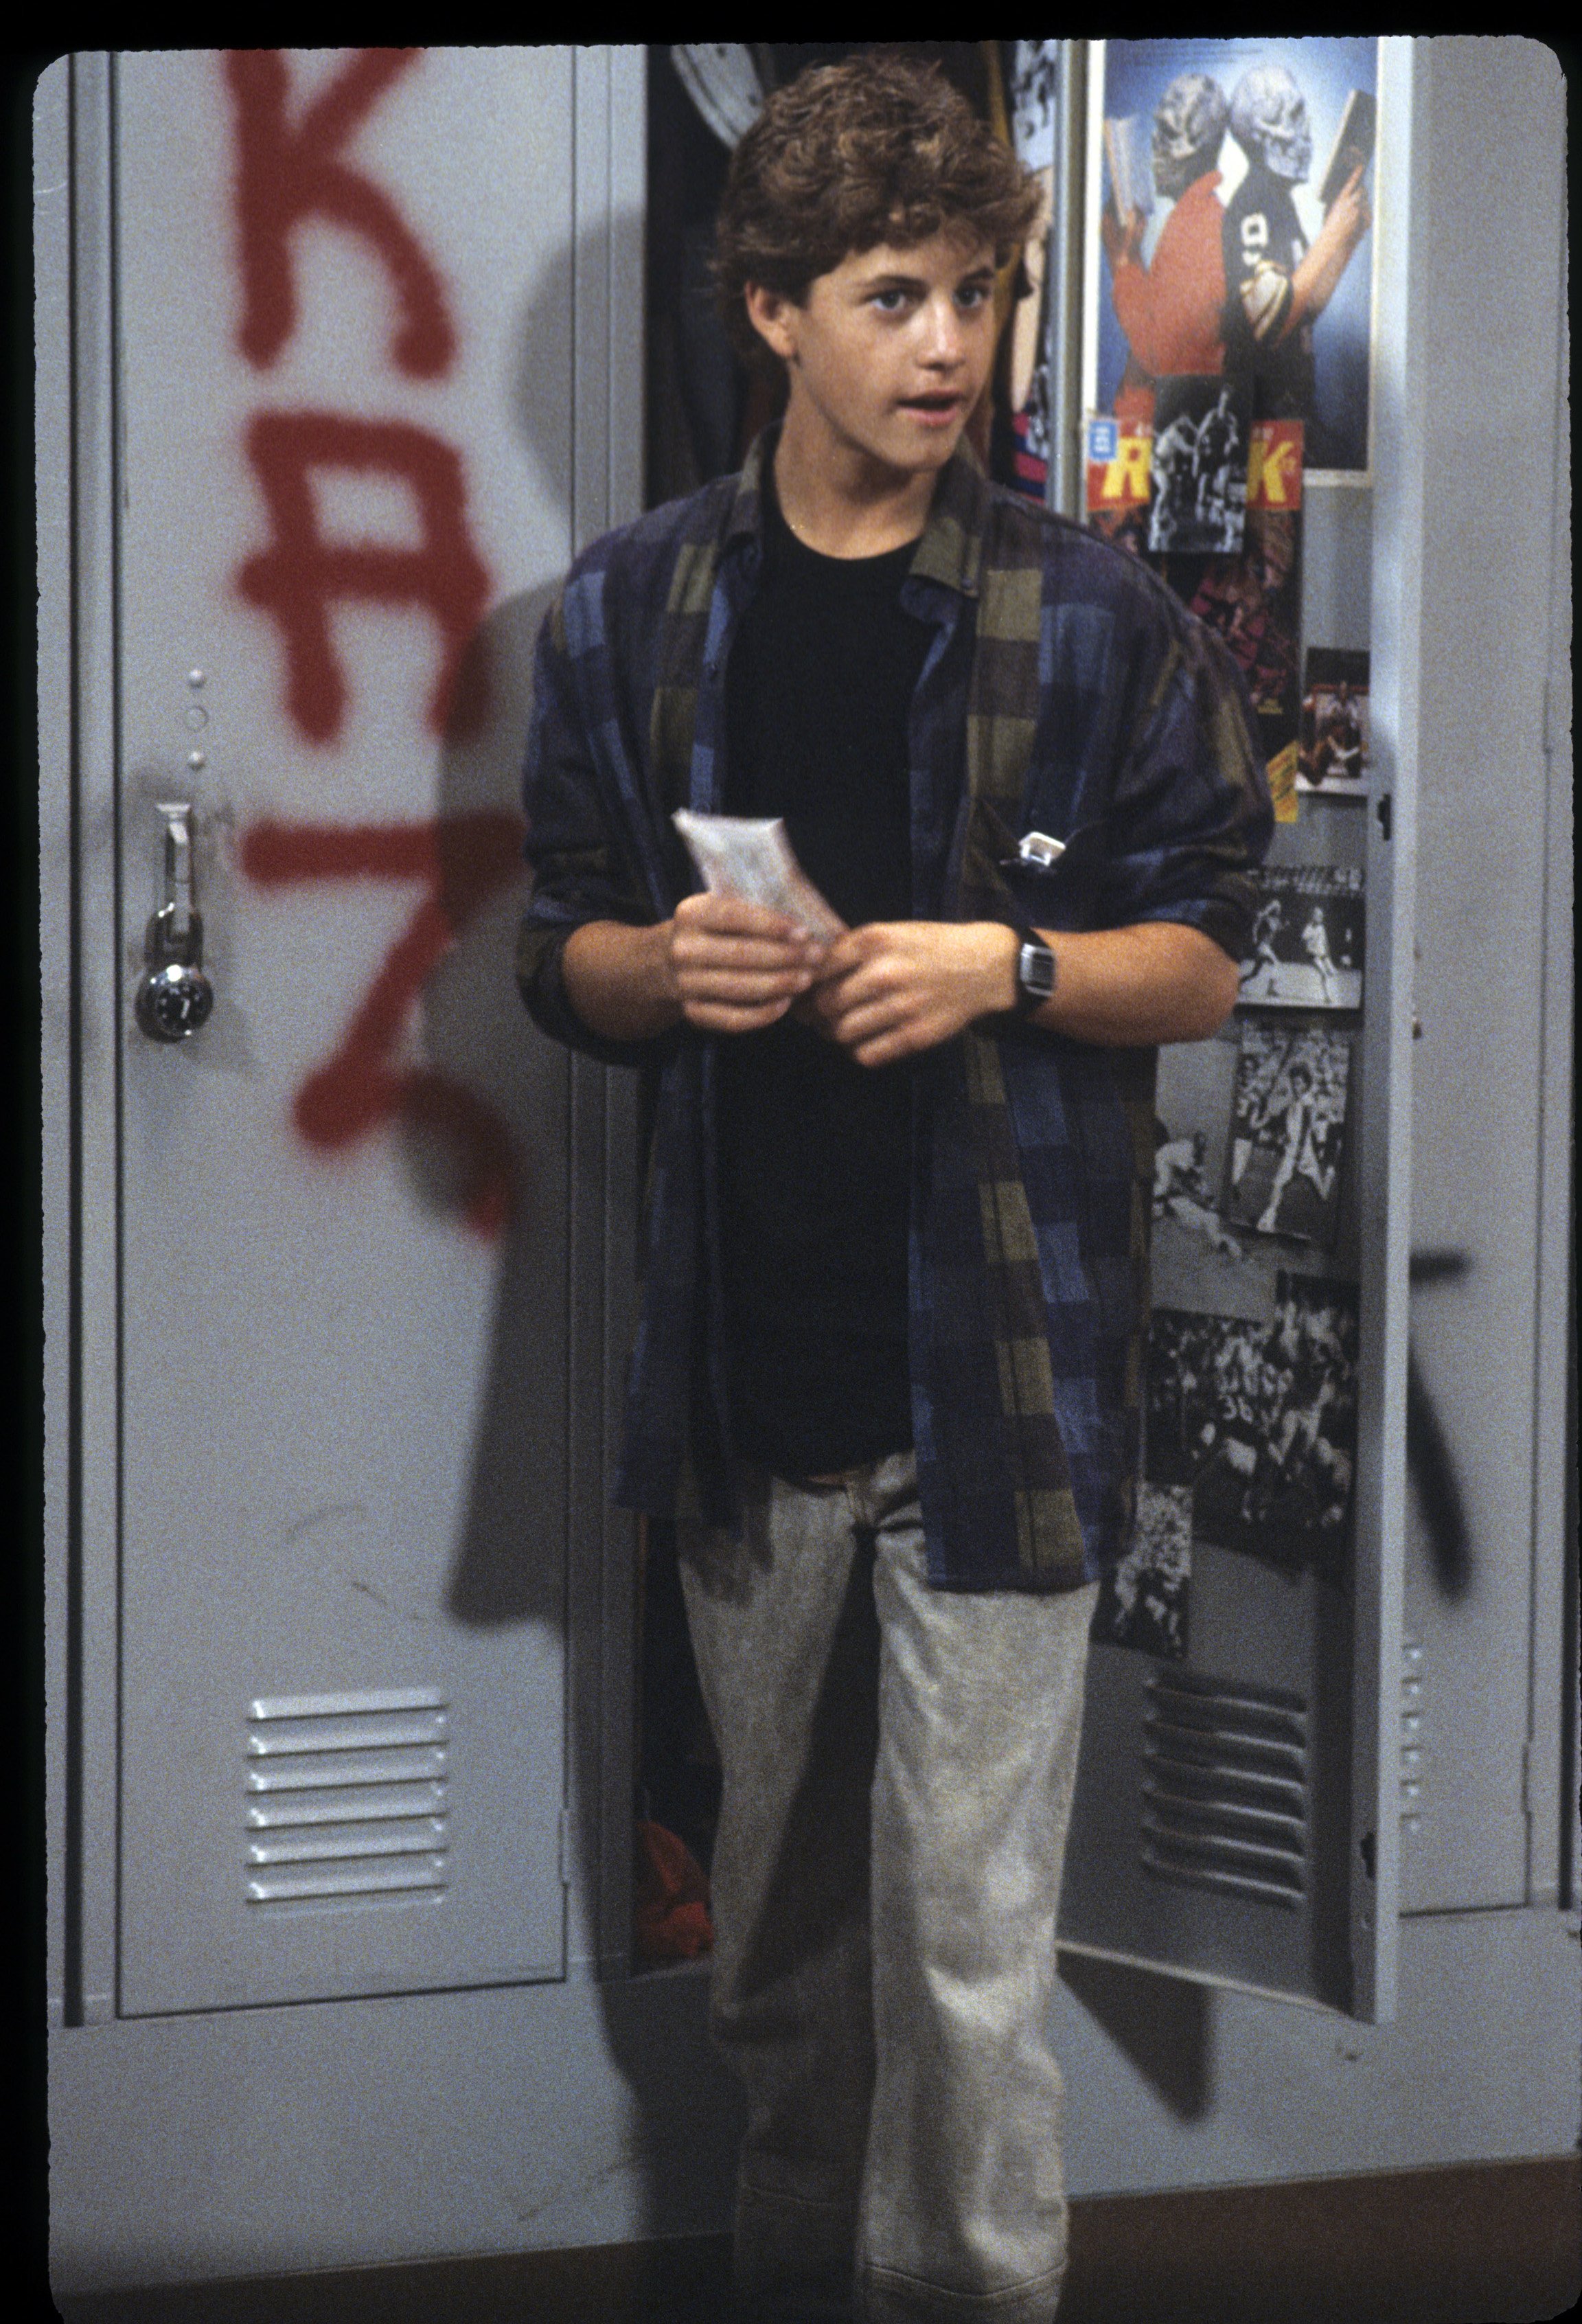 Kirk Cameron as Mike Seaver in the television show, "Growing Pains" on October 1, 1985 | Source: Getty Images